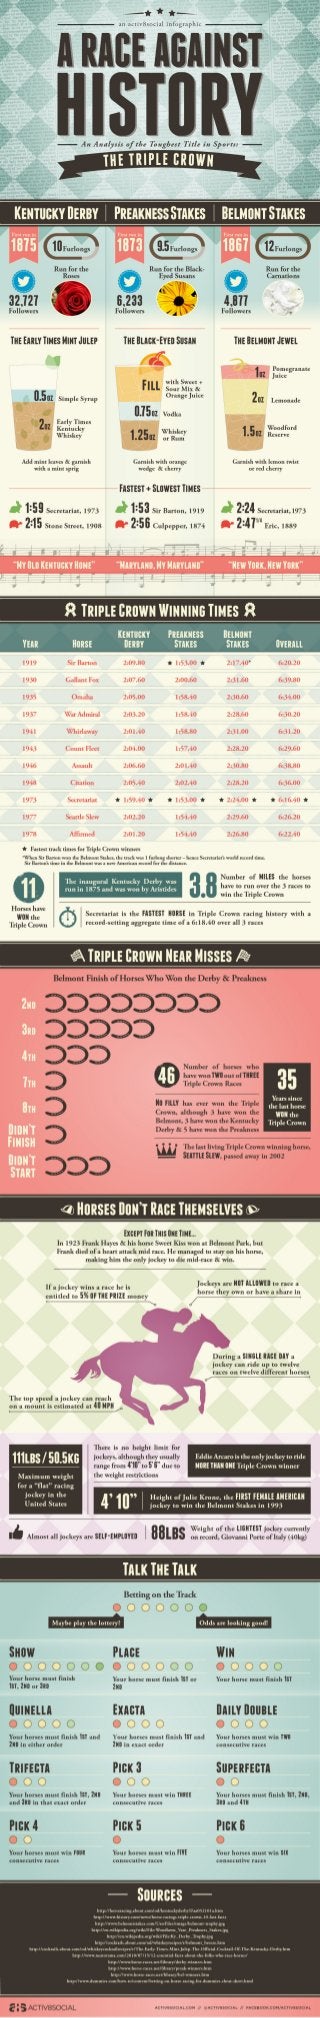 A Race Against History: The Triple Crown [INFOGRAPHIC]